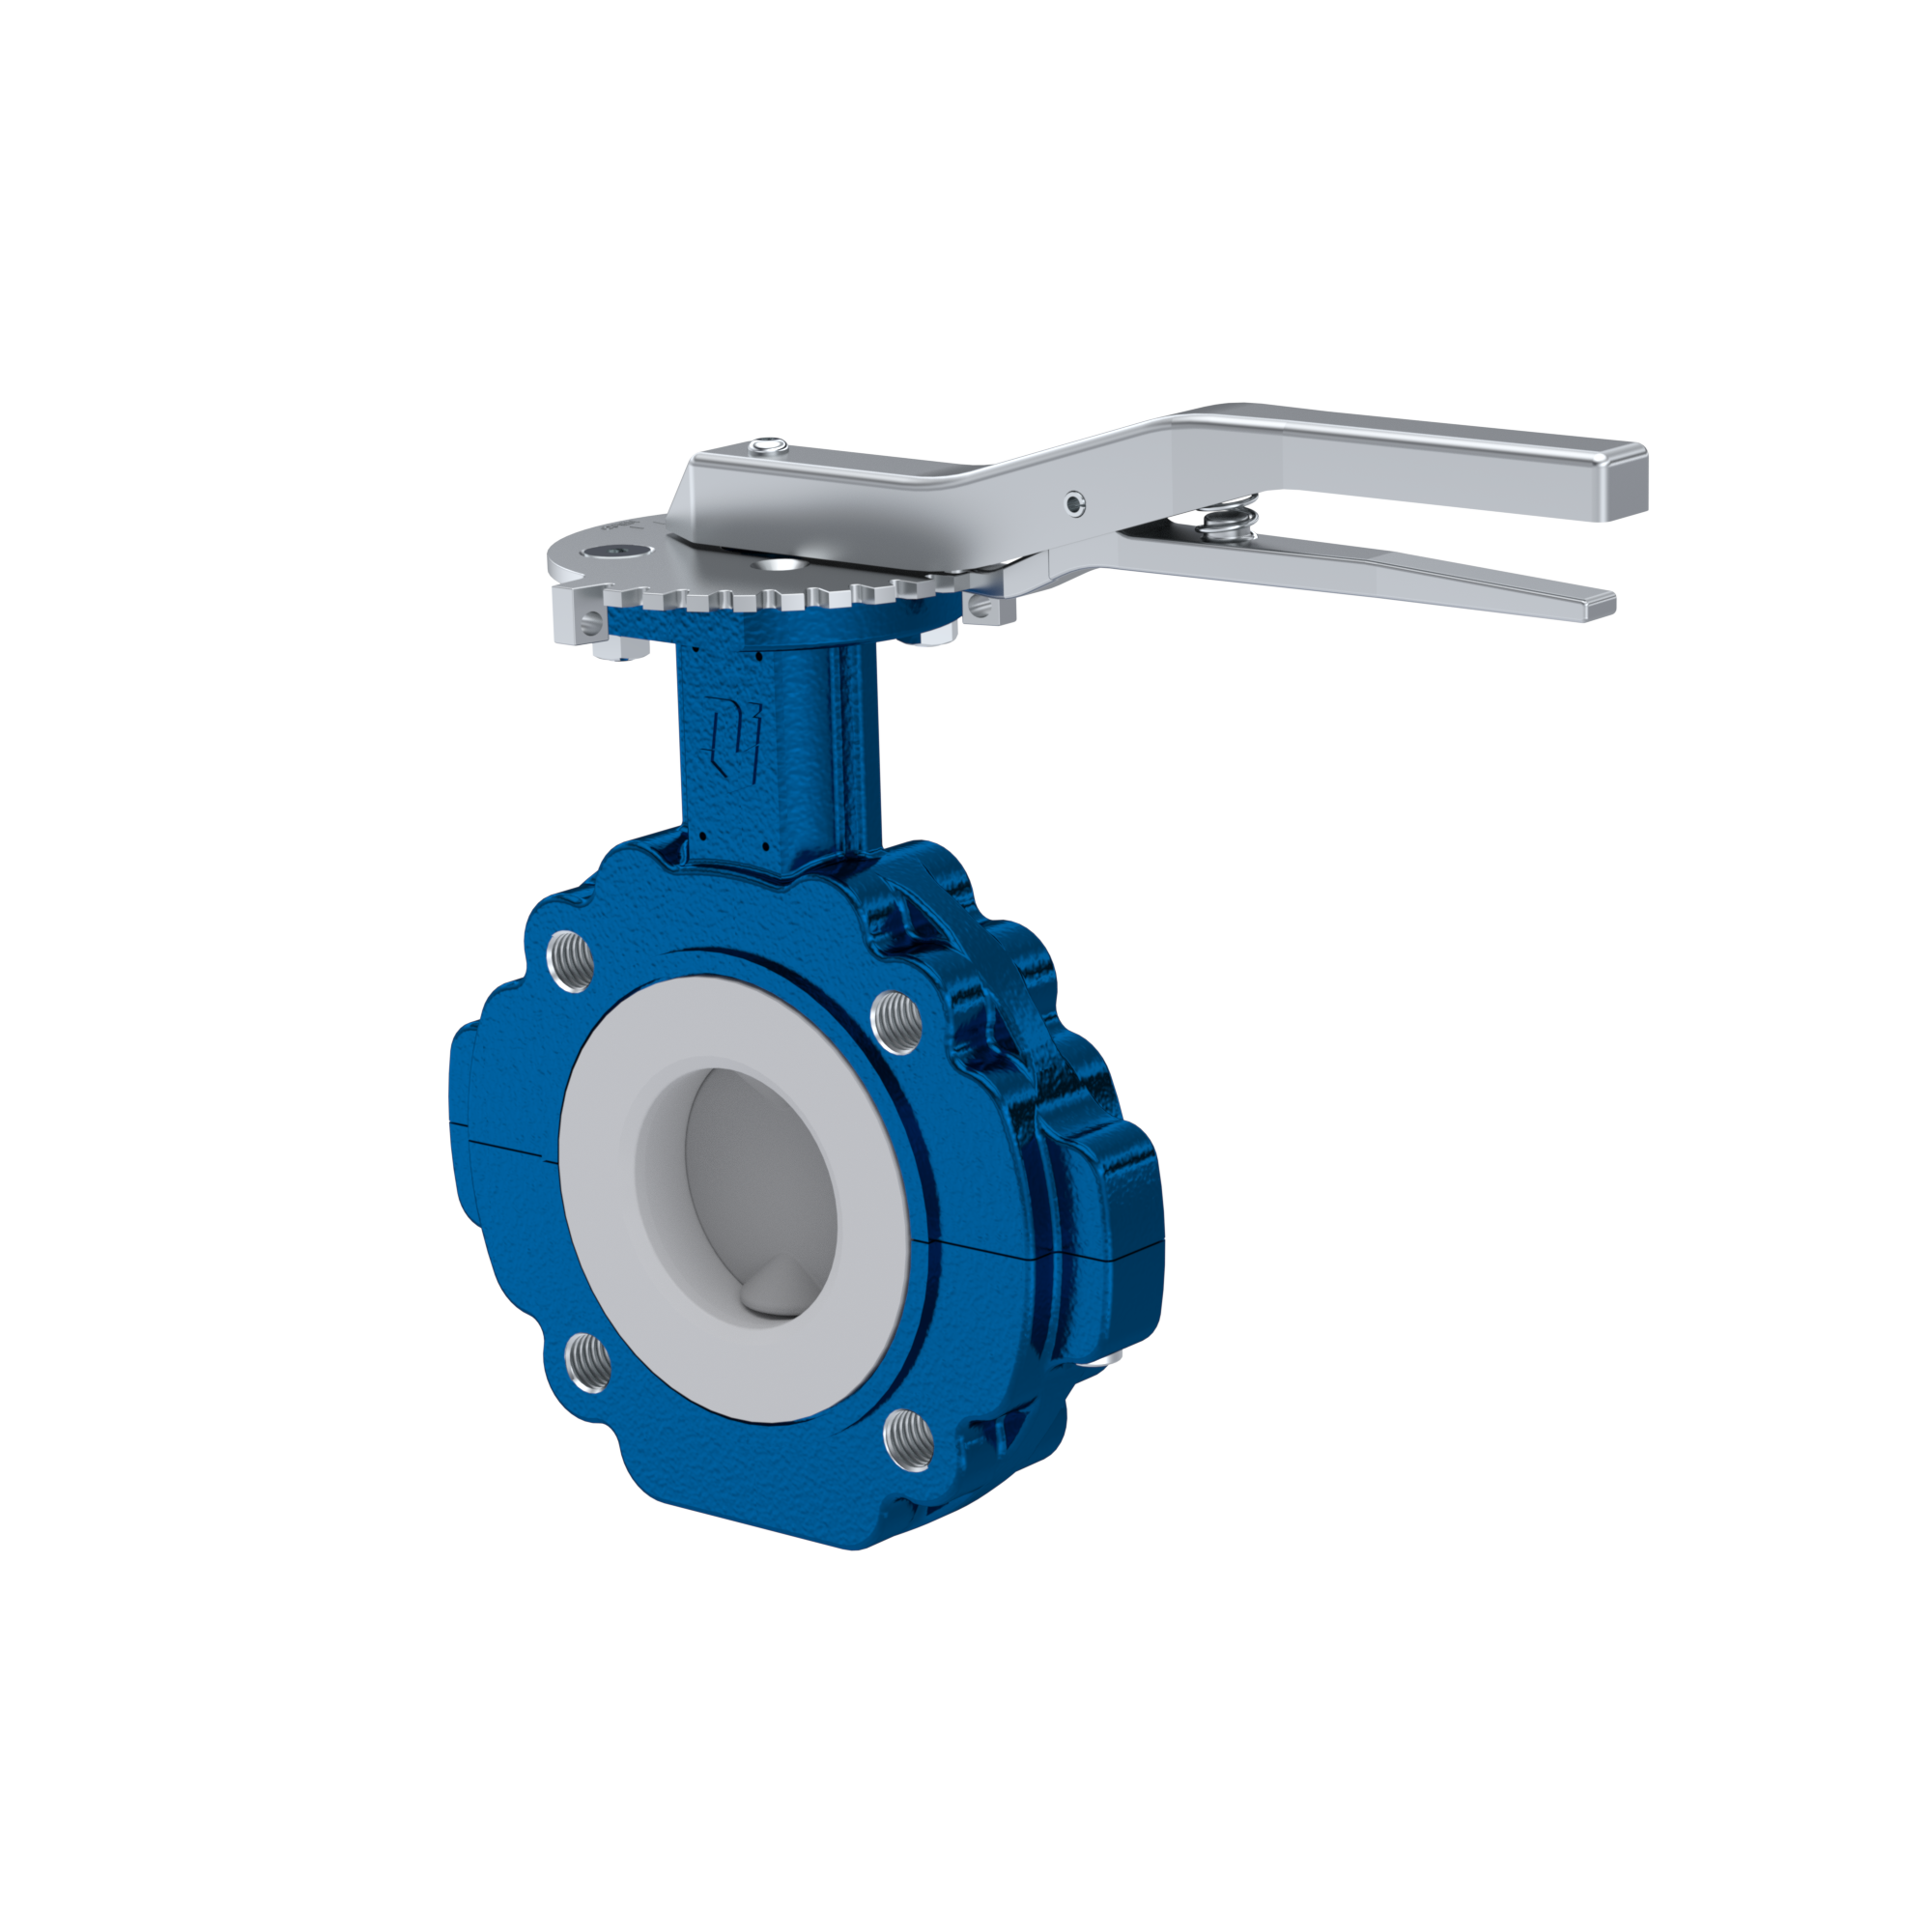 Butterfly-valve PTFE AK10 DN65 ANSI150 lever silicone insert